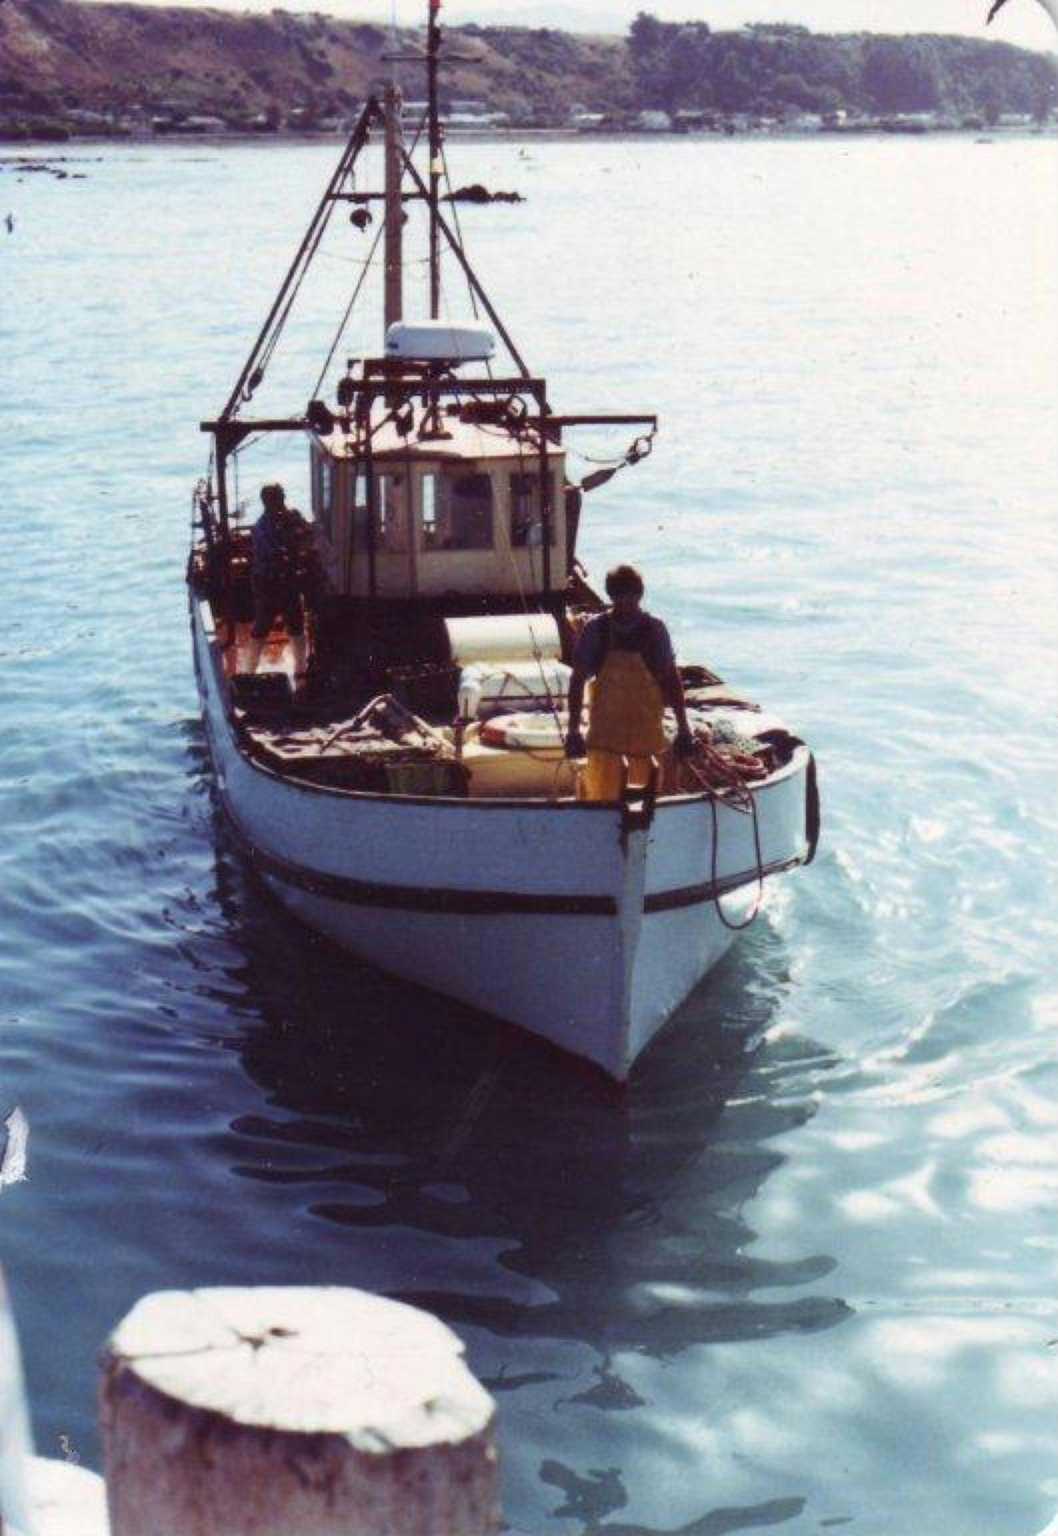 Greg's father Sven Summerton, and brother Brent Summerton aboard the San Giovanni – 1989